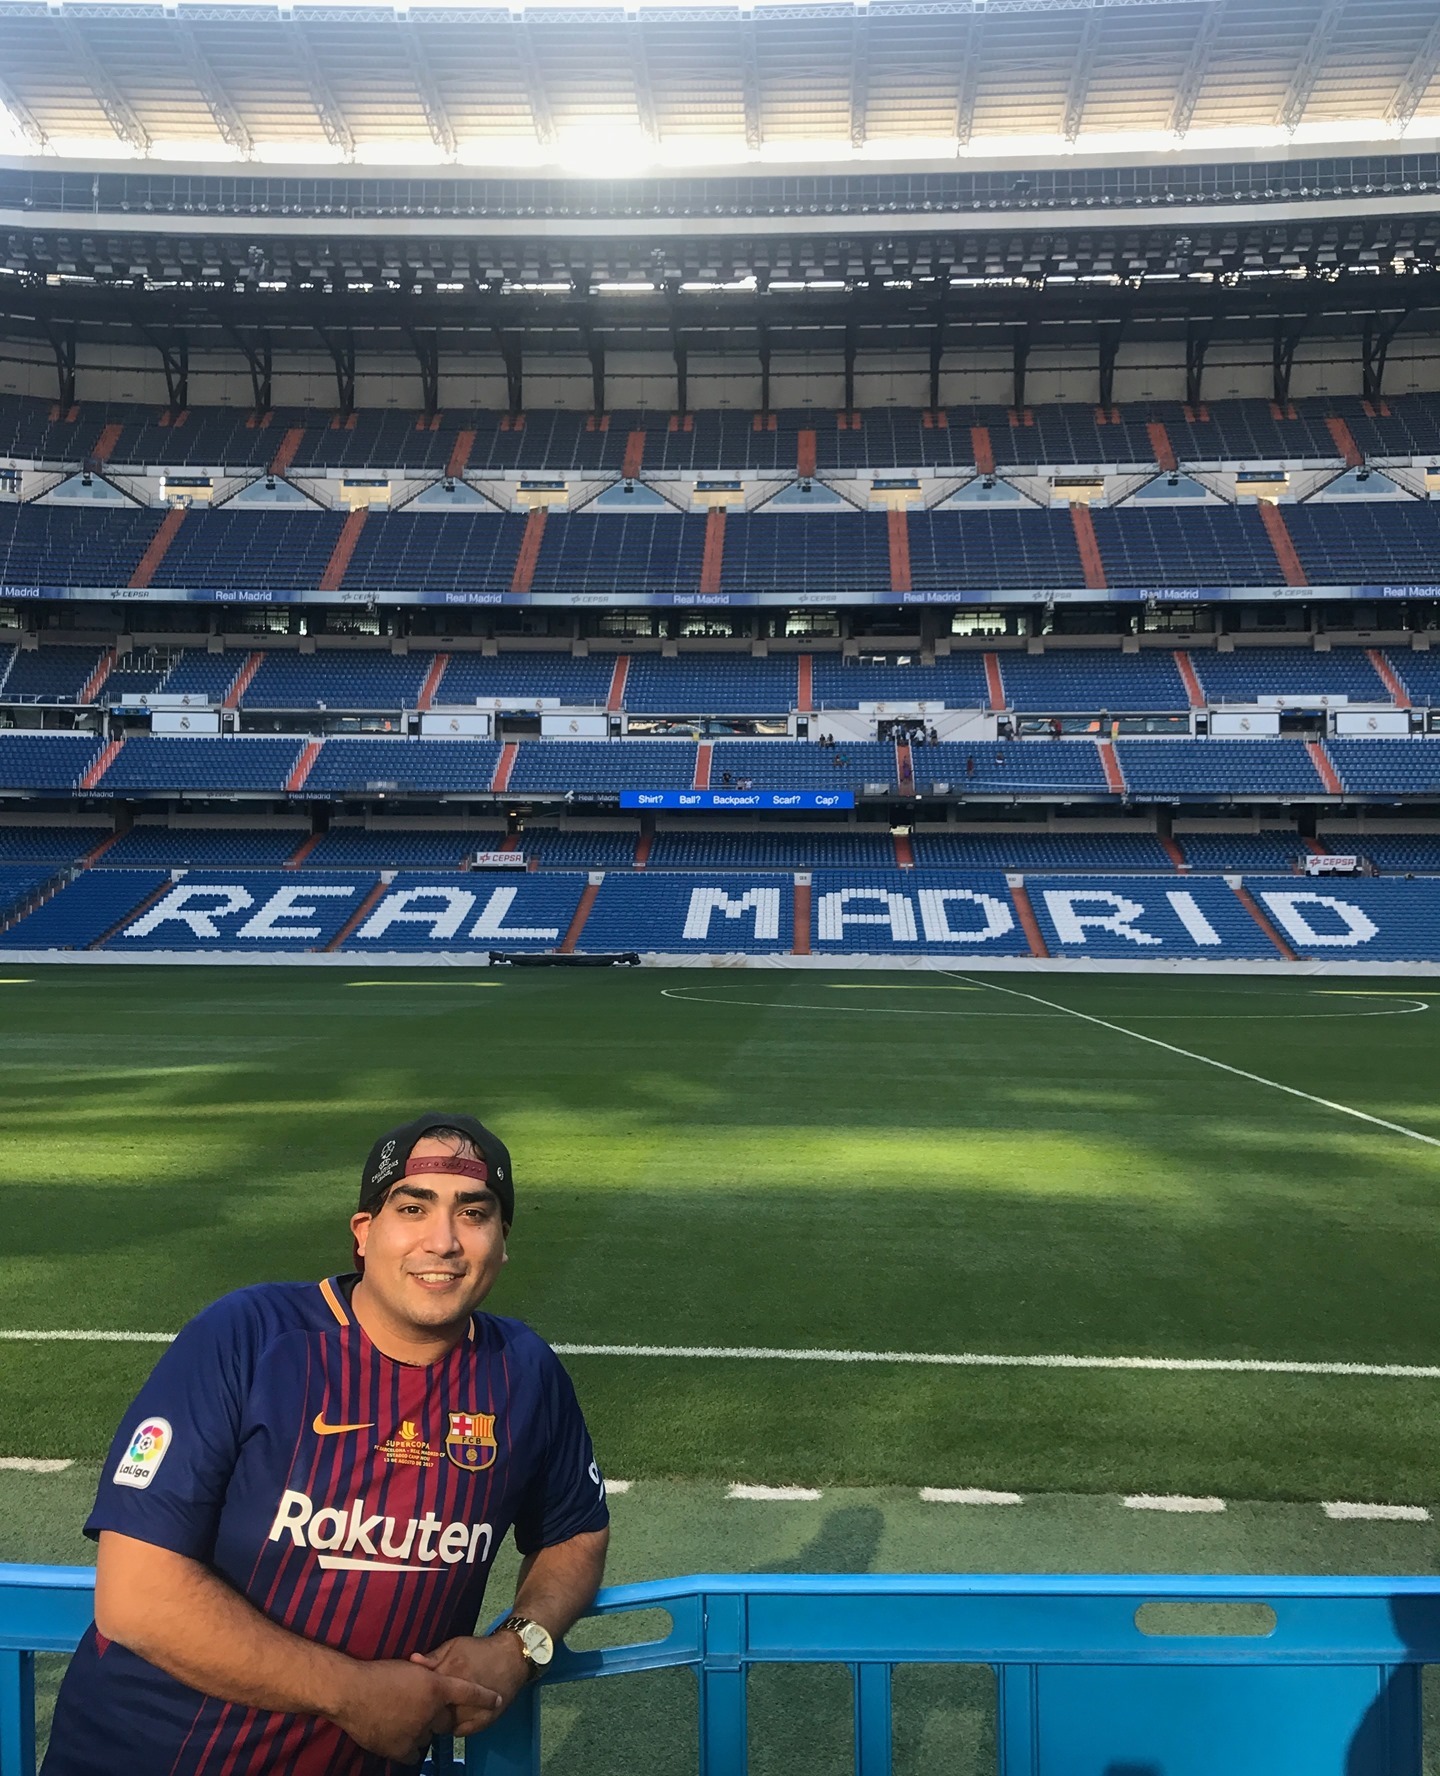 I love the game of disrespect! GAMEDAY BABY! El Clasico, love them all, today at 12pm pt, Barcelona vs Real Madrid...Lets go Barca, if we get the win we are one step closer towards a la liga title! and now we pray⁠
.⁠
.⁠
.⁠